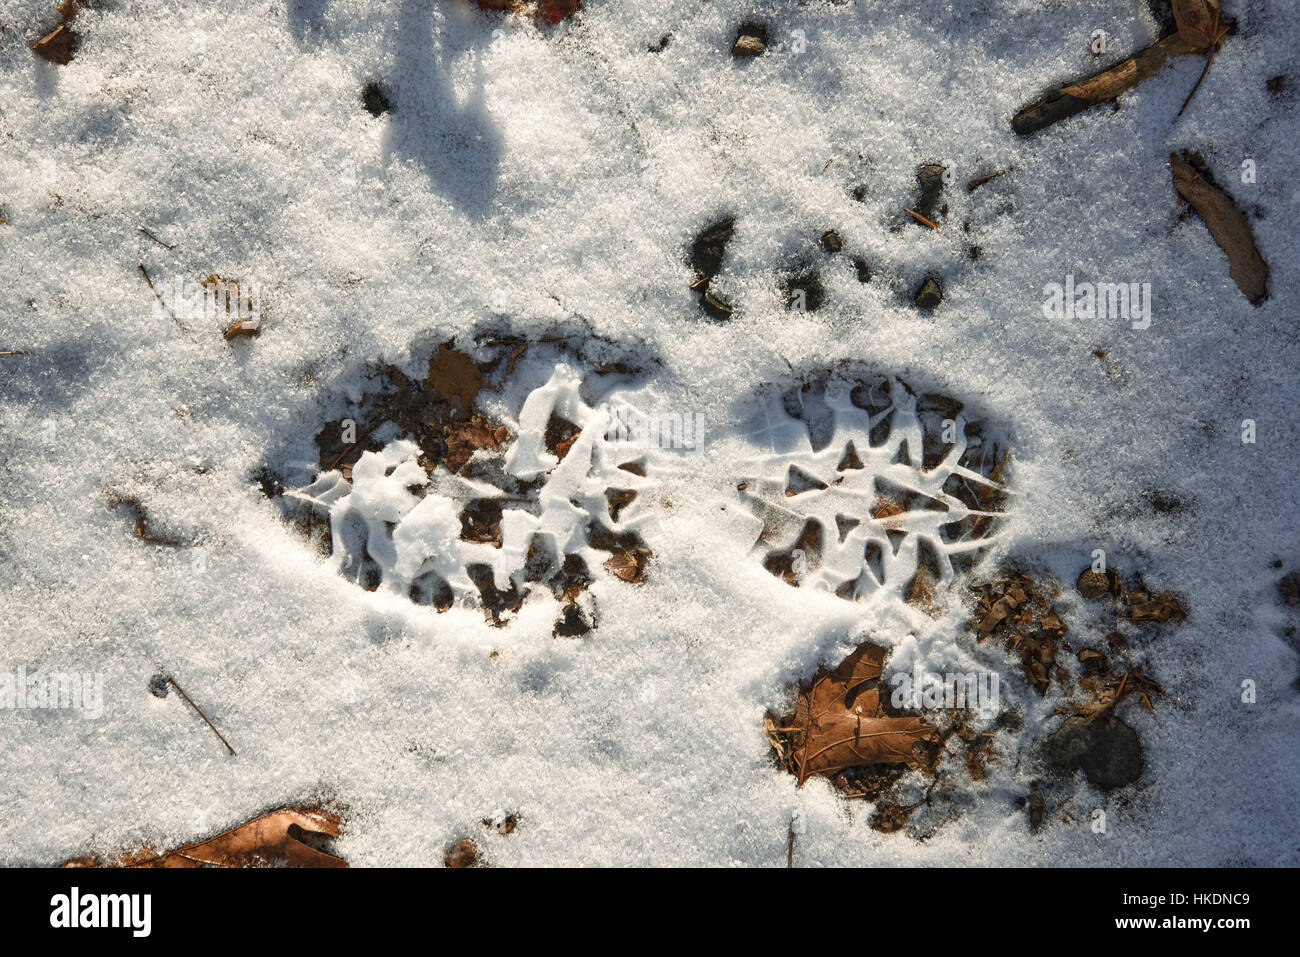 A footprint in the snow left by a hiker or runner Stock Photo